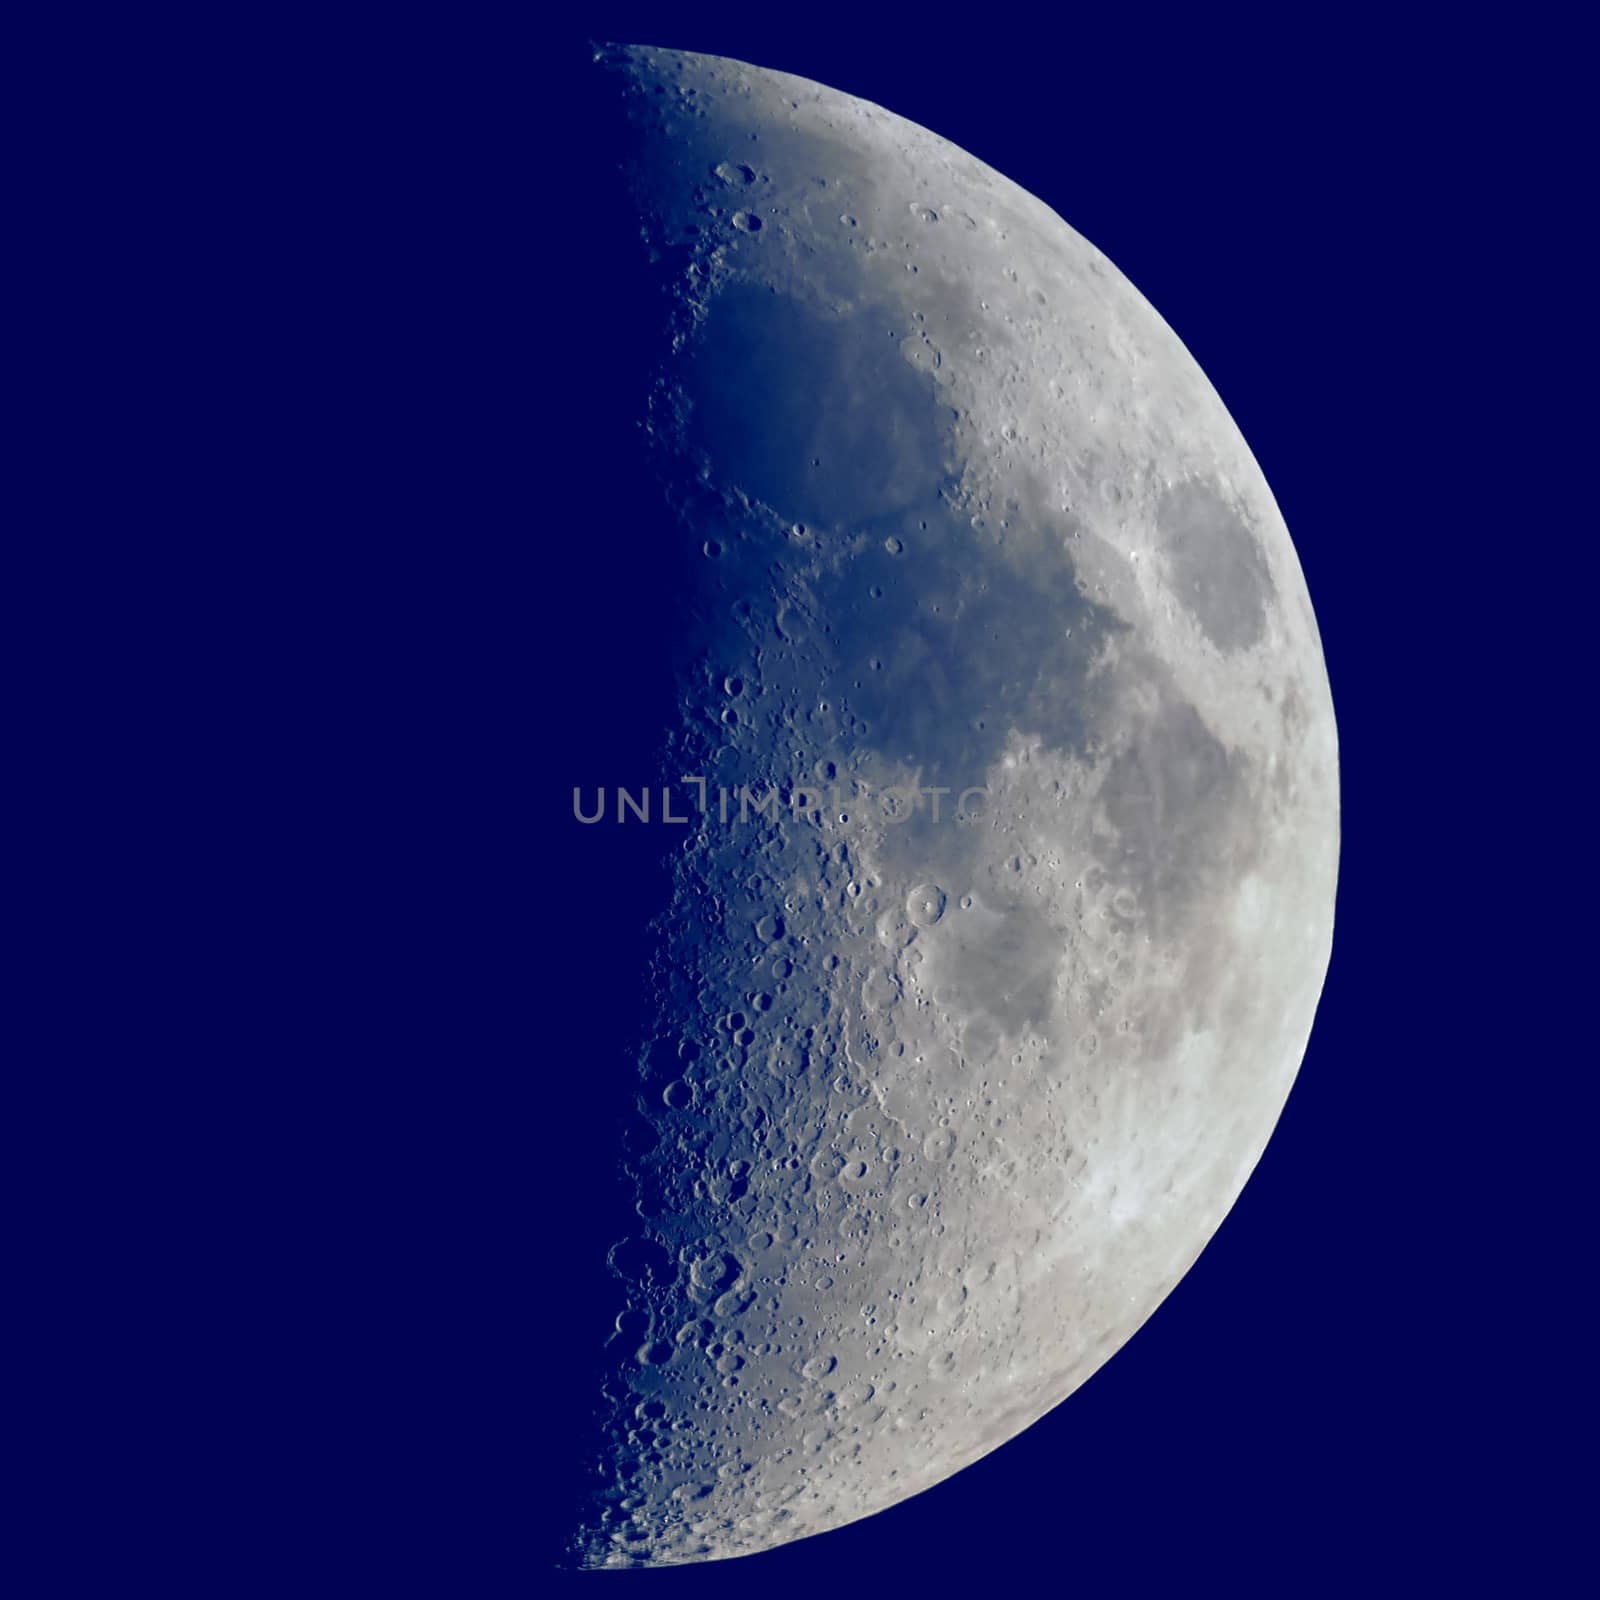 First quarter moon seen with telescope by claudiodivizia